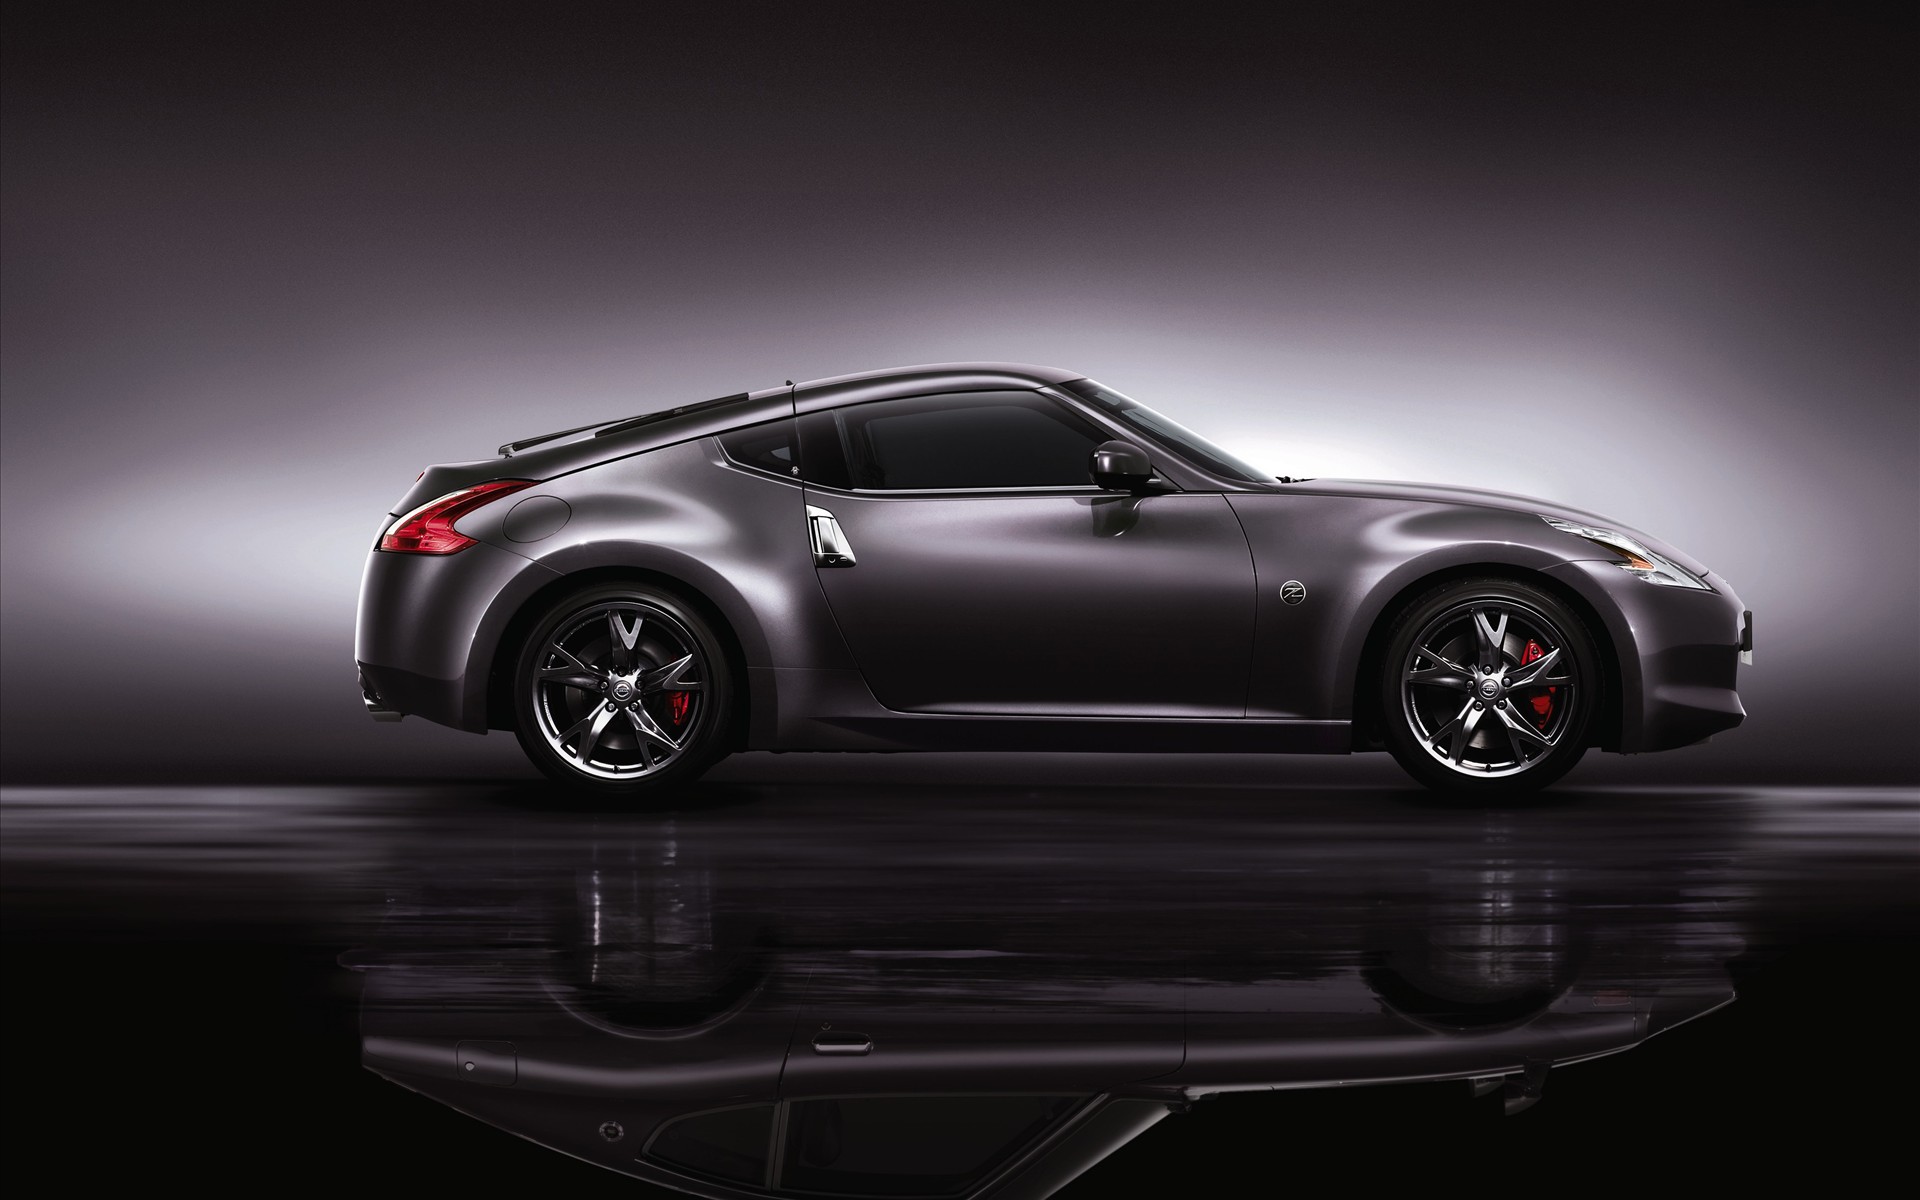  Edition 370Z 40th Anniversary Model 2 Wallpapers HD Wallpapers 1920x1200